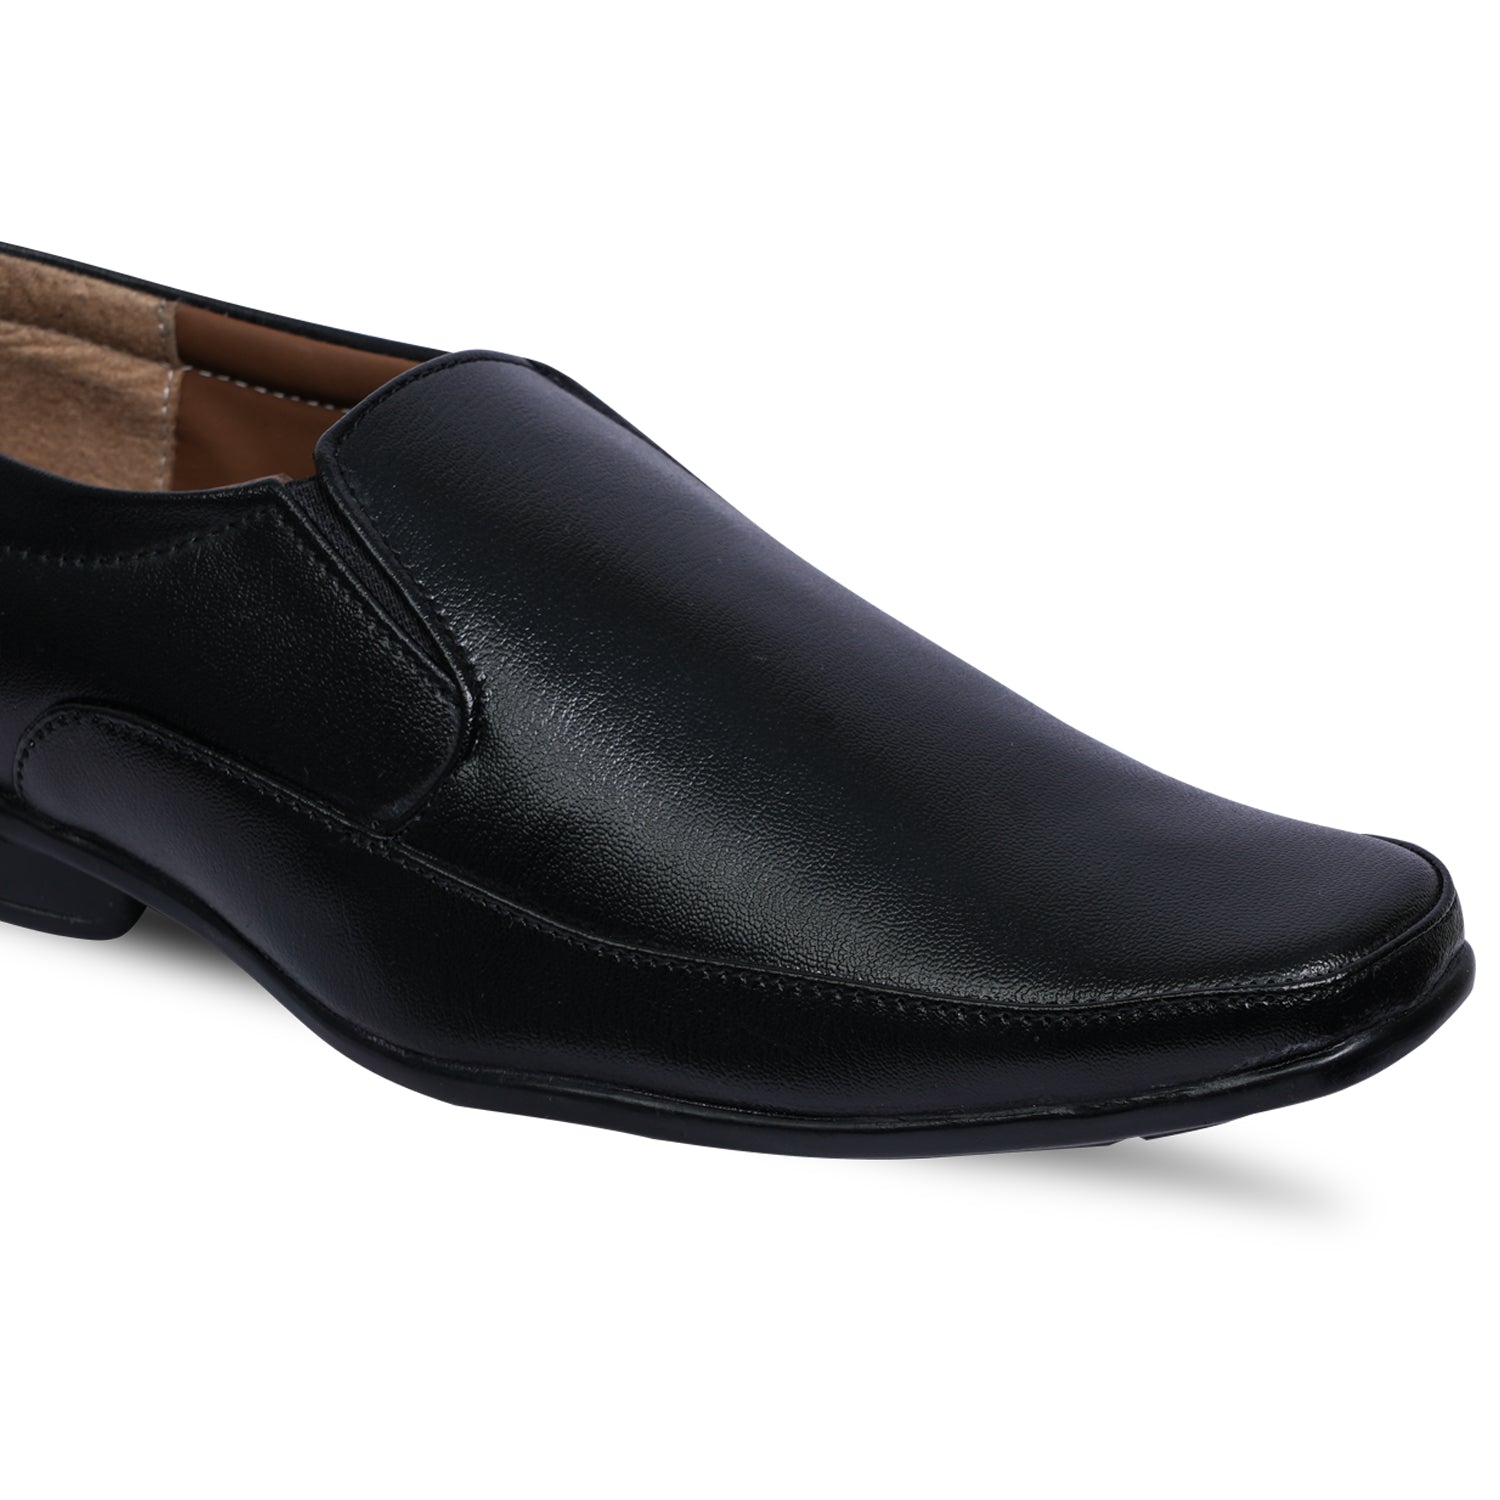 Paragon R2003G Men Formal Shoes | Corporate Office Shoes | Smart &amp; Sleek Design | Comfortable Sole with Cushioning | Daily &amp; Occasion Wear